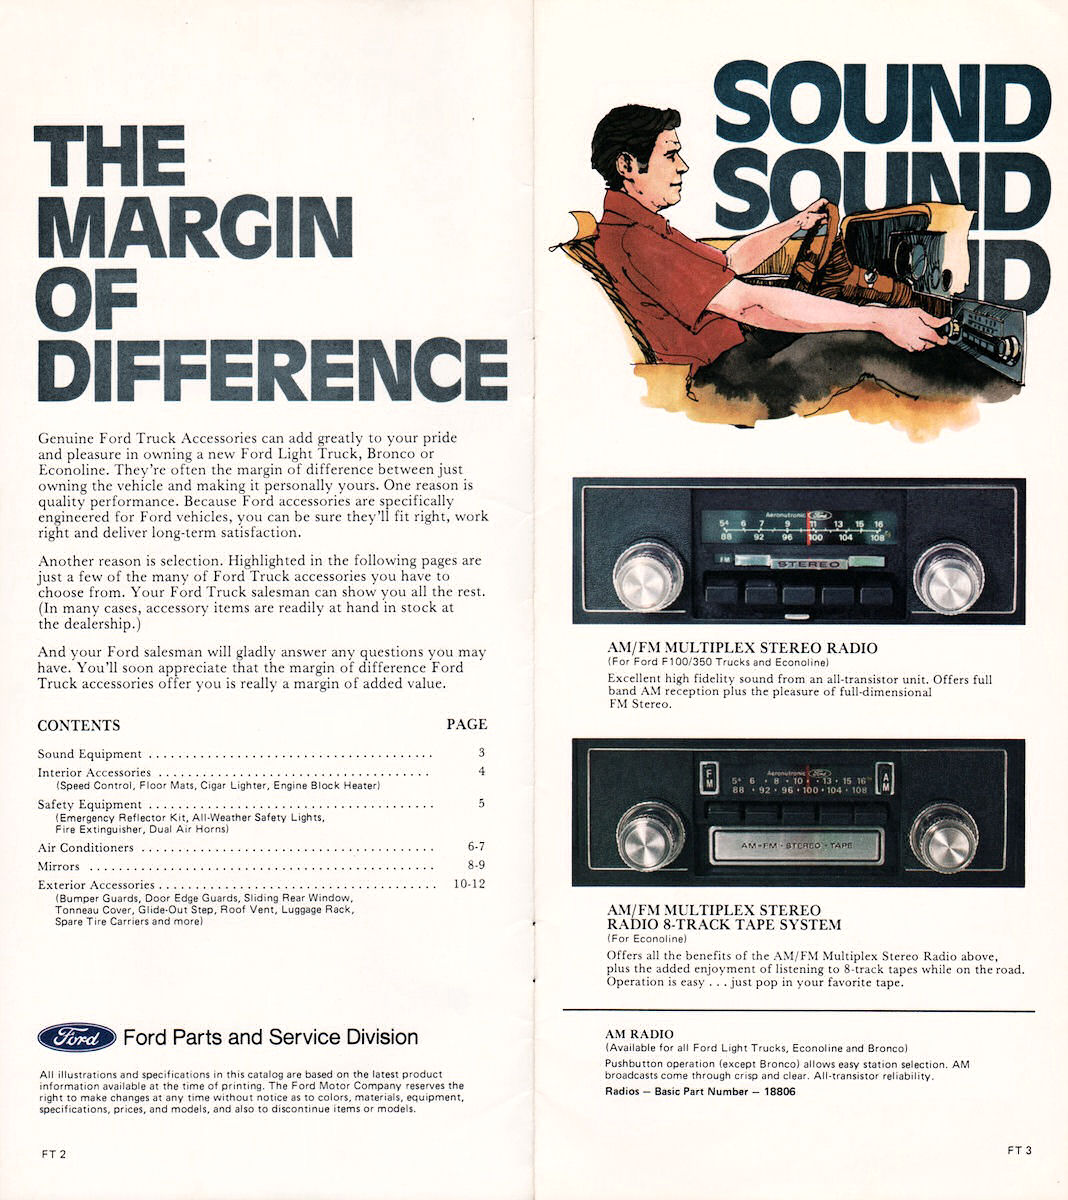 1977_Ford_Truck_Accessories-02-03